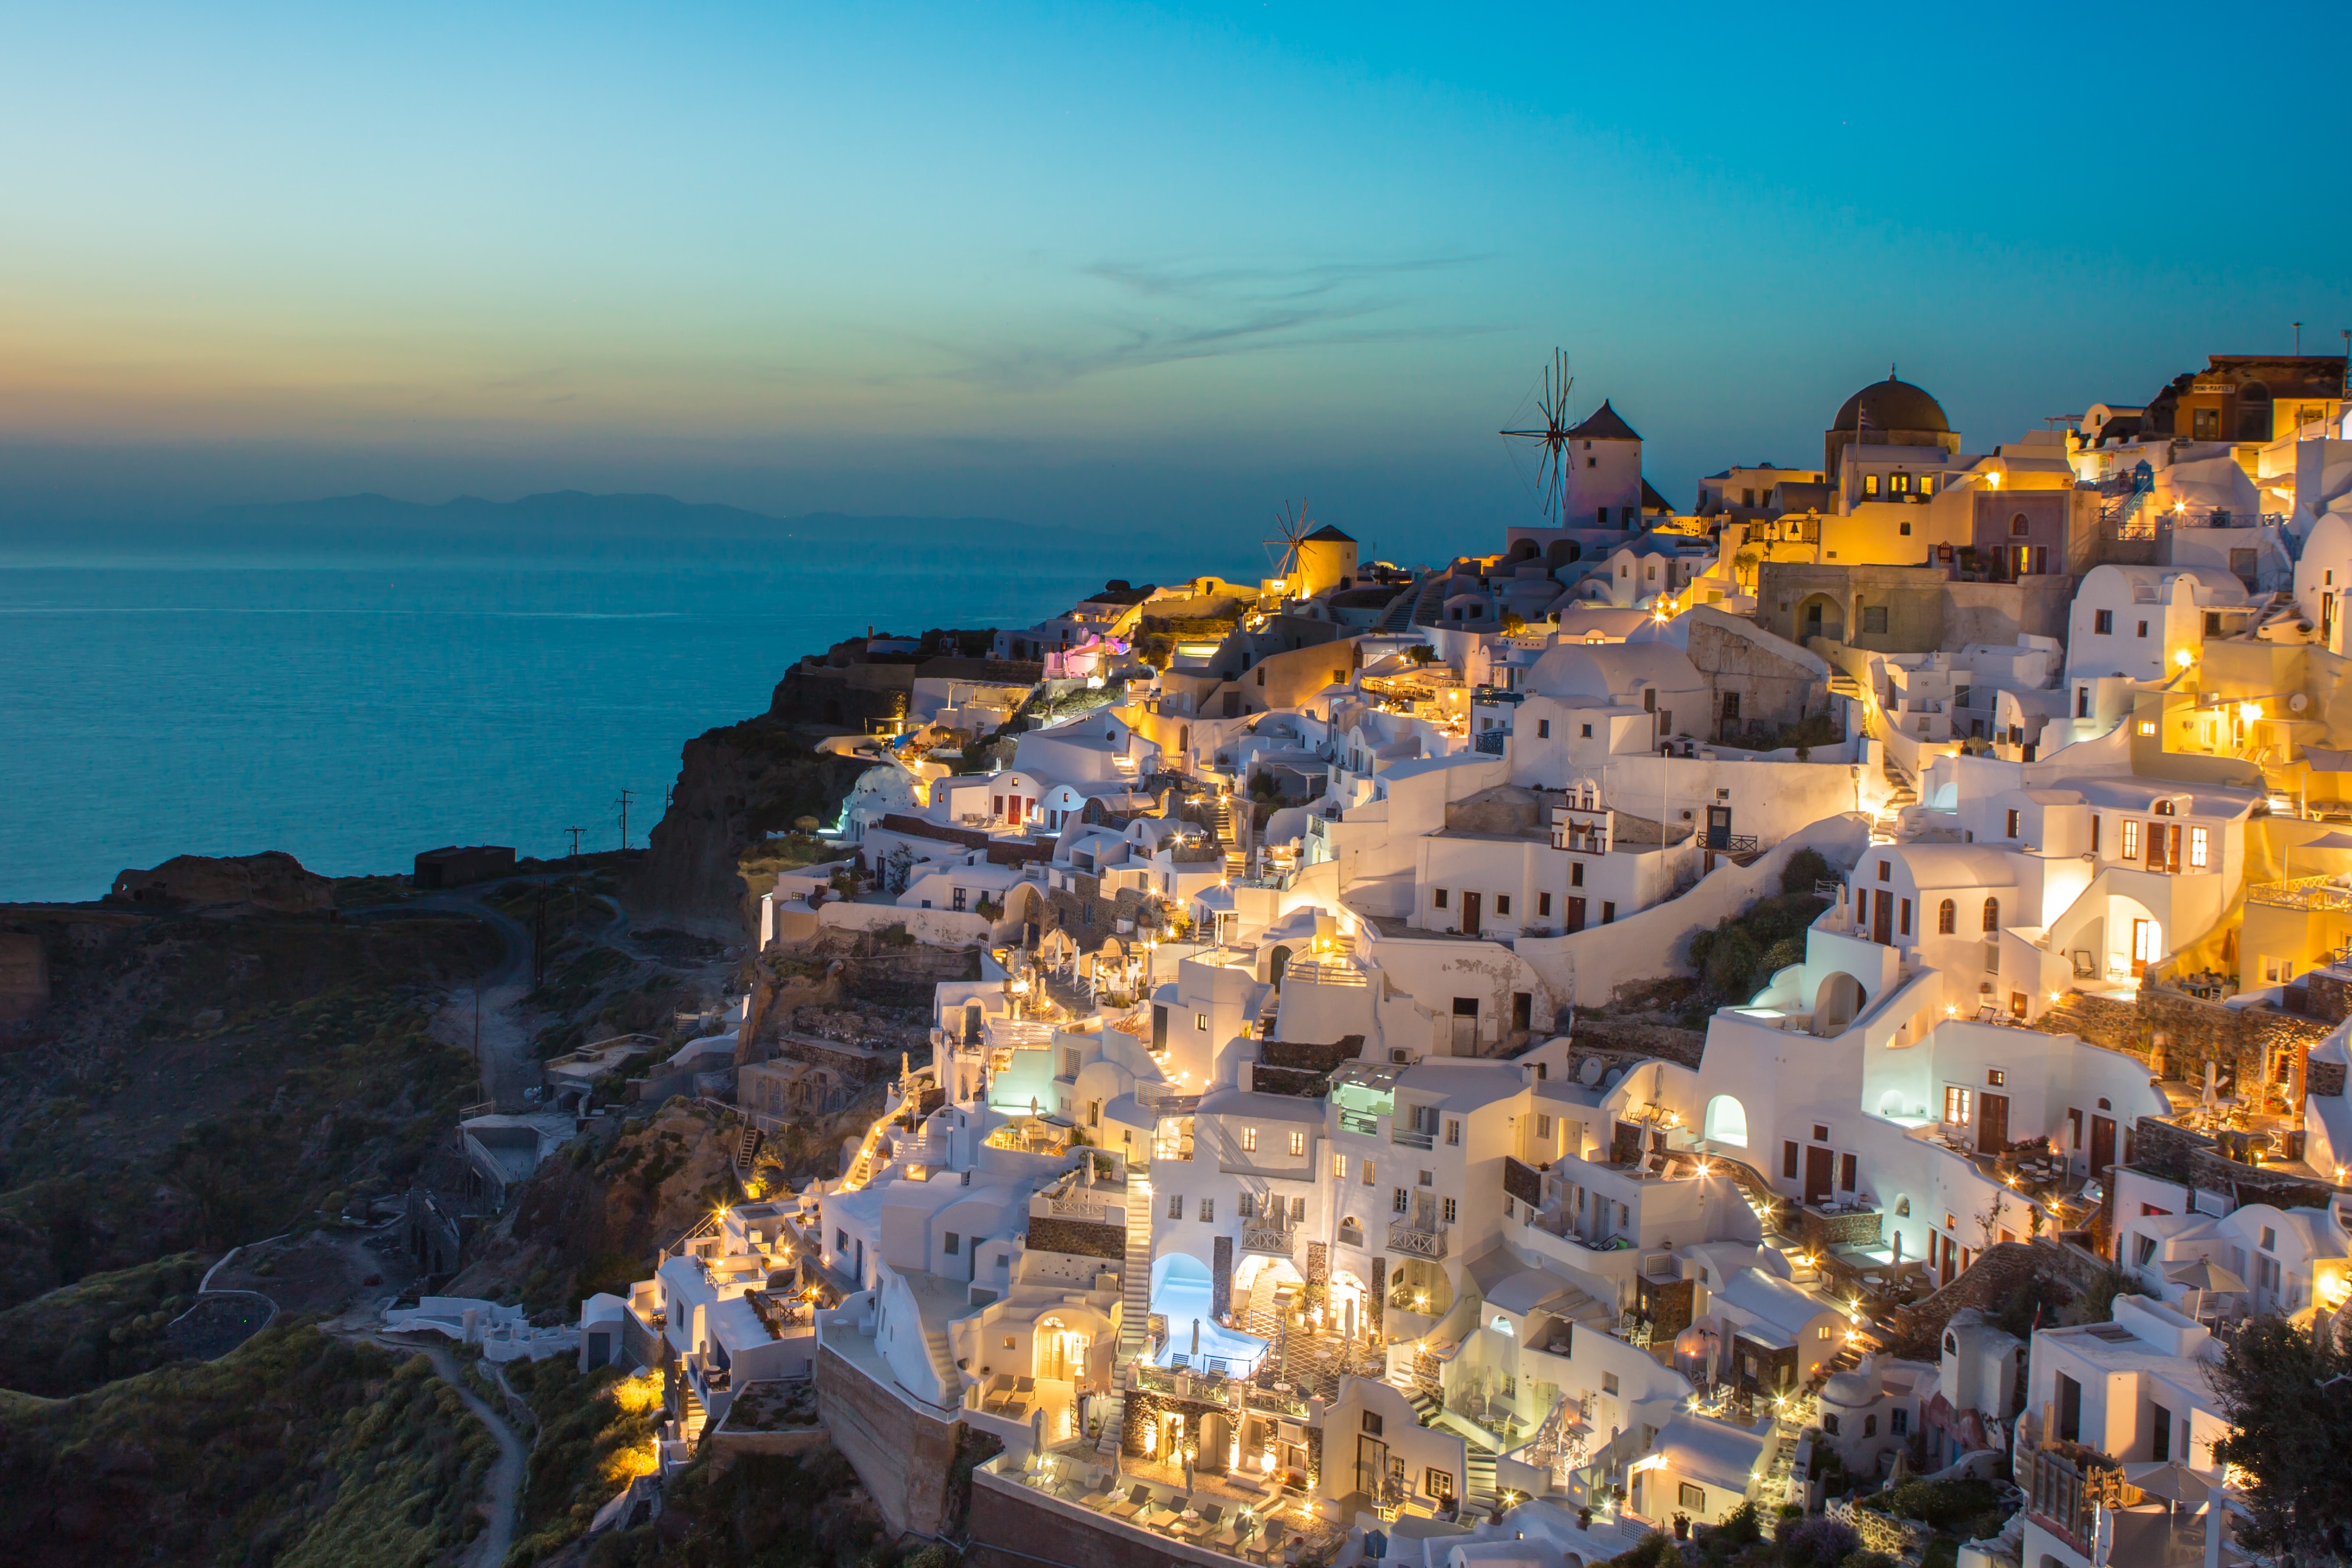 Santorini's white building lit up during golden hour, the sun setting in the horizon. Sights like these make it one of the best vacations in September